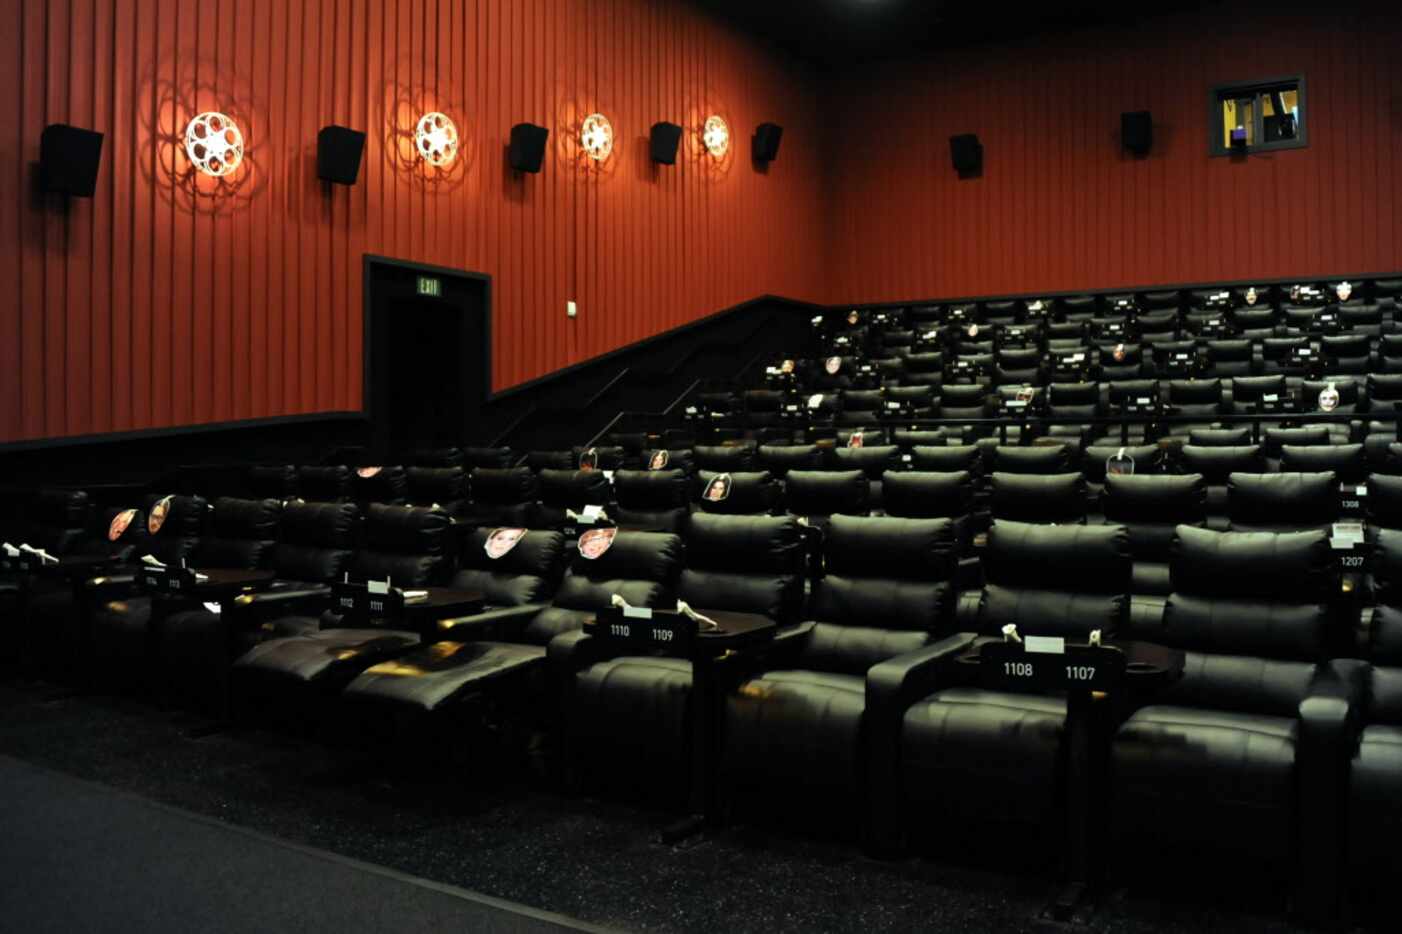 The larger theaters seat 153 guests at Alamo Drafthouse Cinema Dallas.